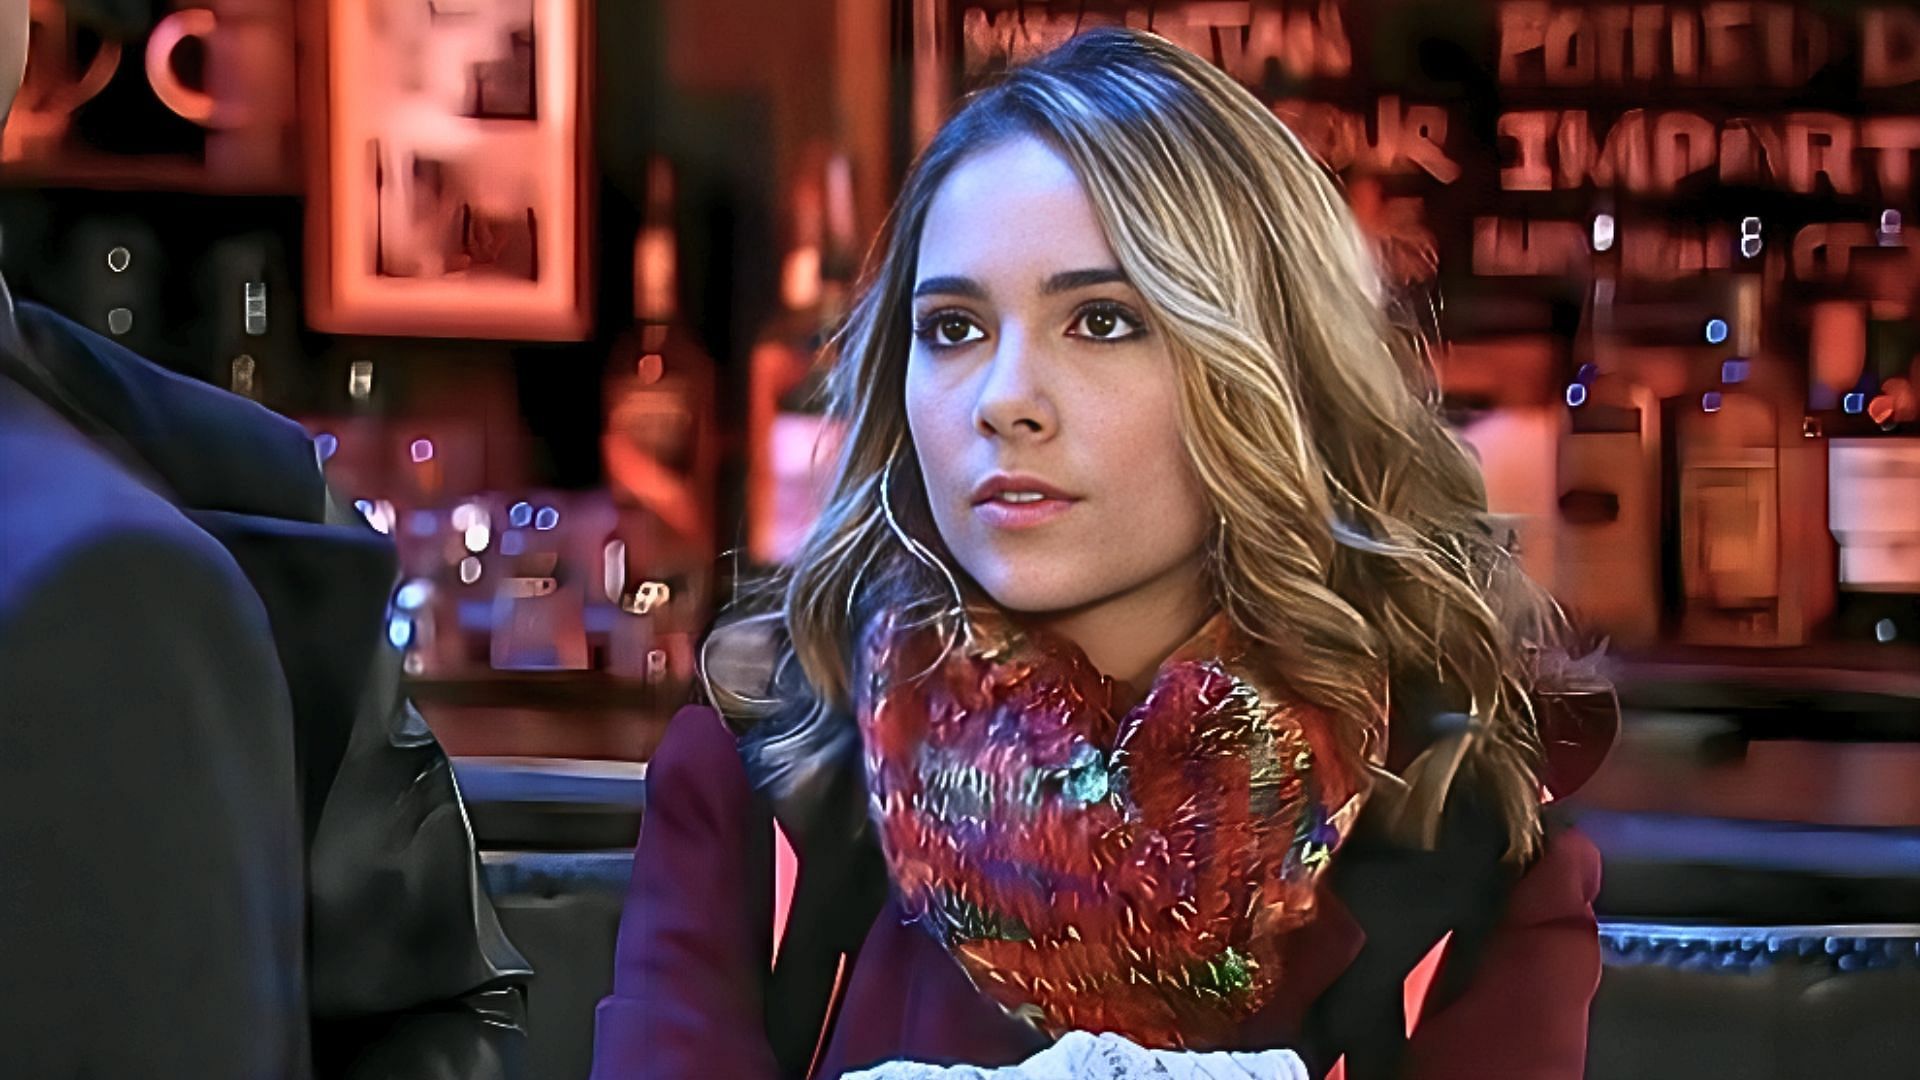 Actress Haley Pullos as Molly Lansing-Davis in a still from General Hospital (Image via ABC)